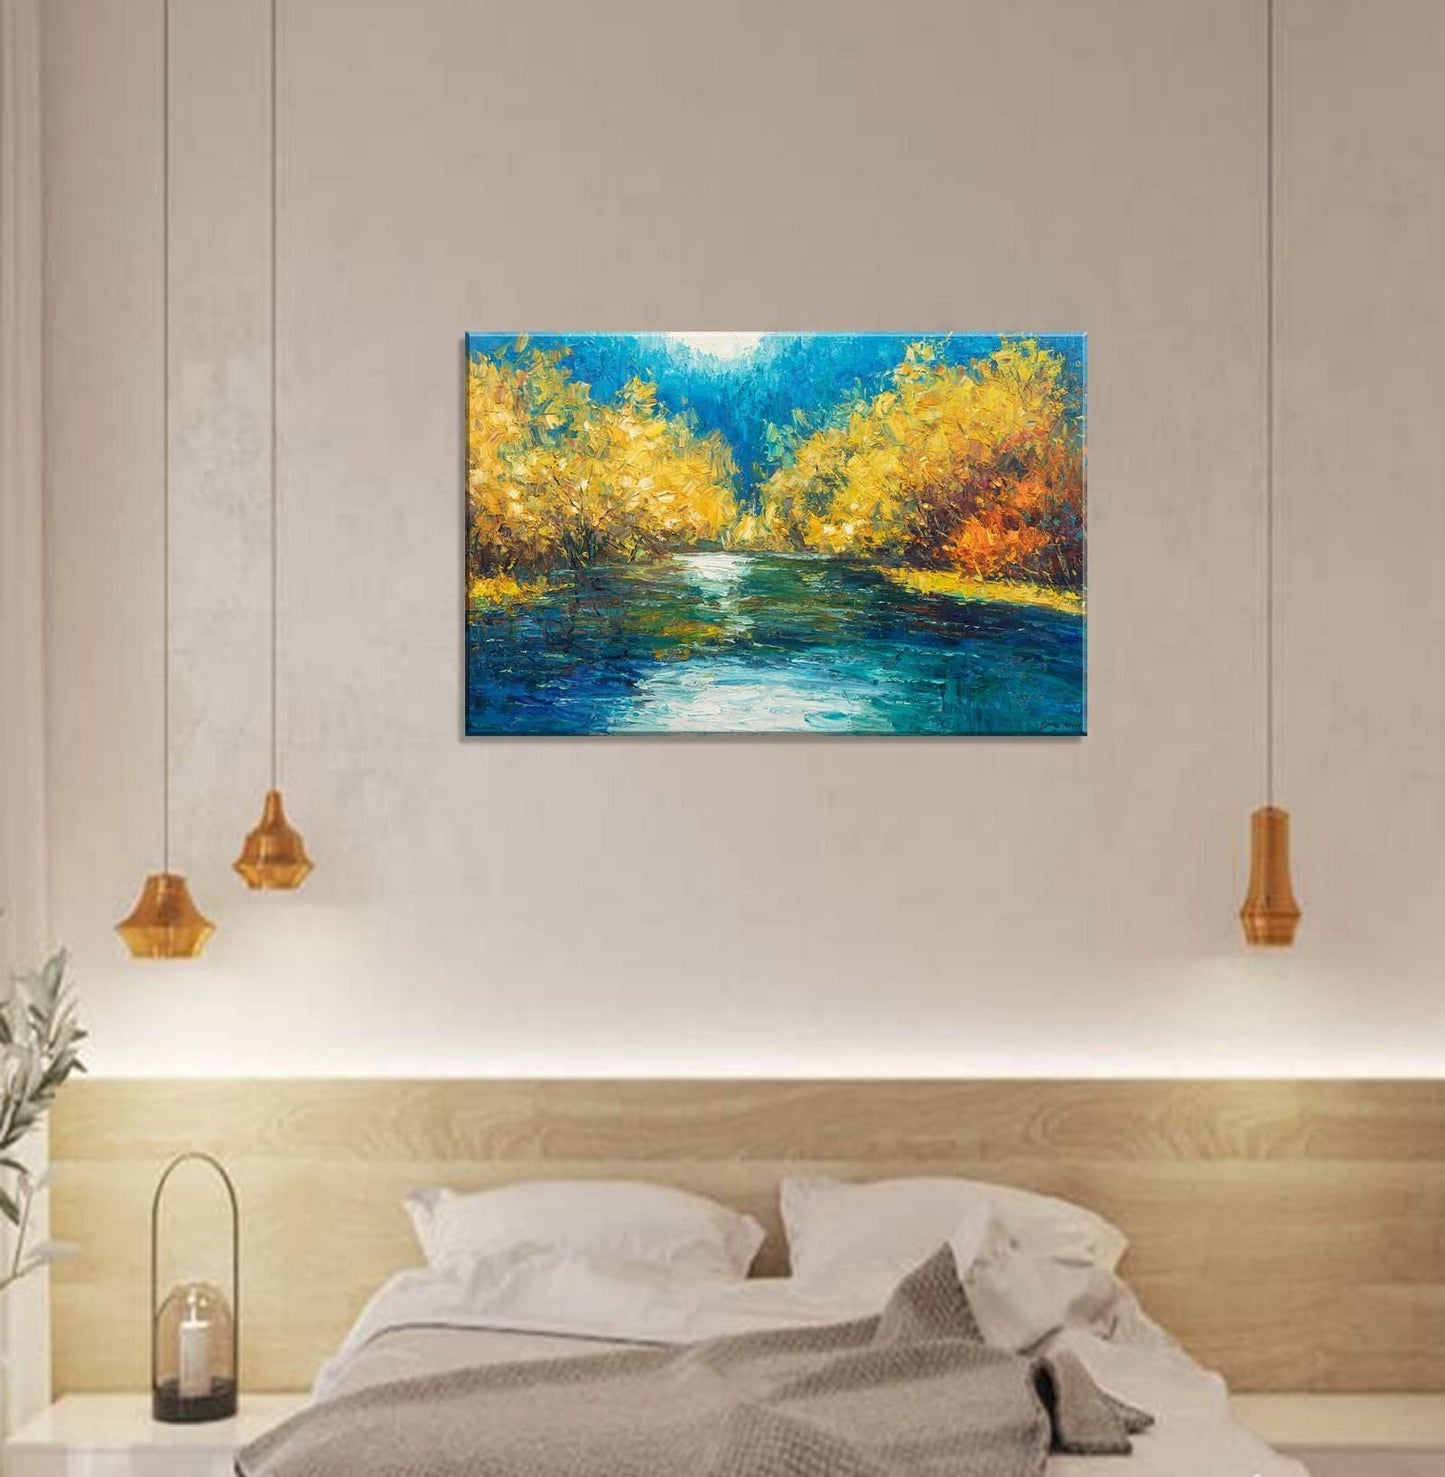 Large Landscape Painting, Original Abstract Art, Large Canvas Art, Canvas Wall Decor, Knife Art, Contemporary Painting, Autumn Forest Yellow